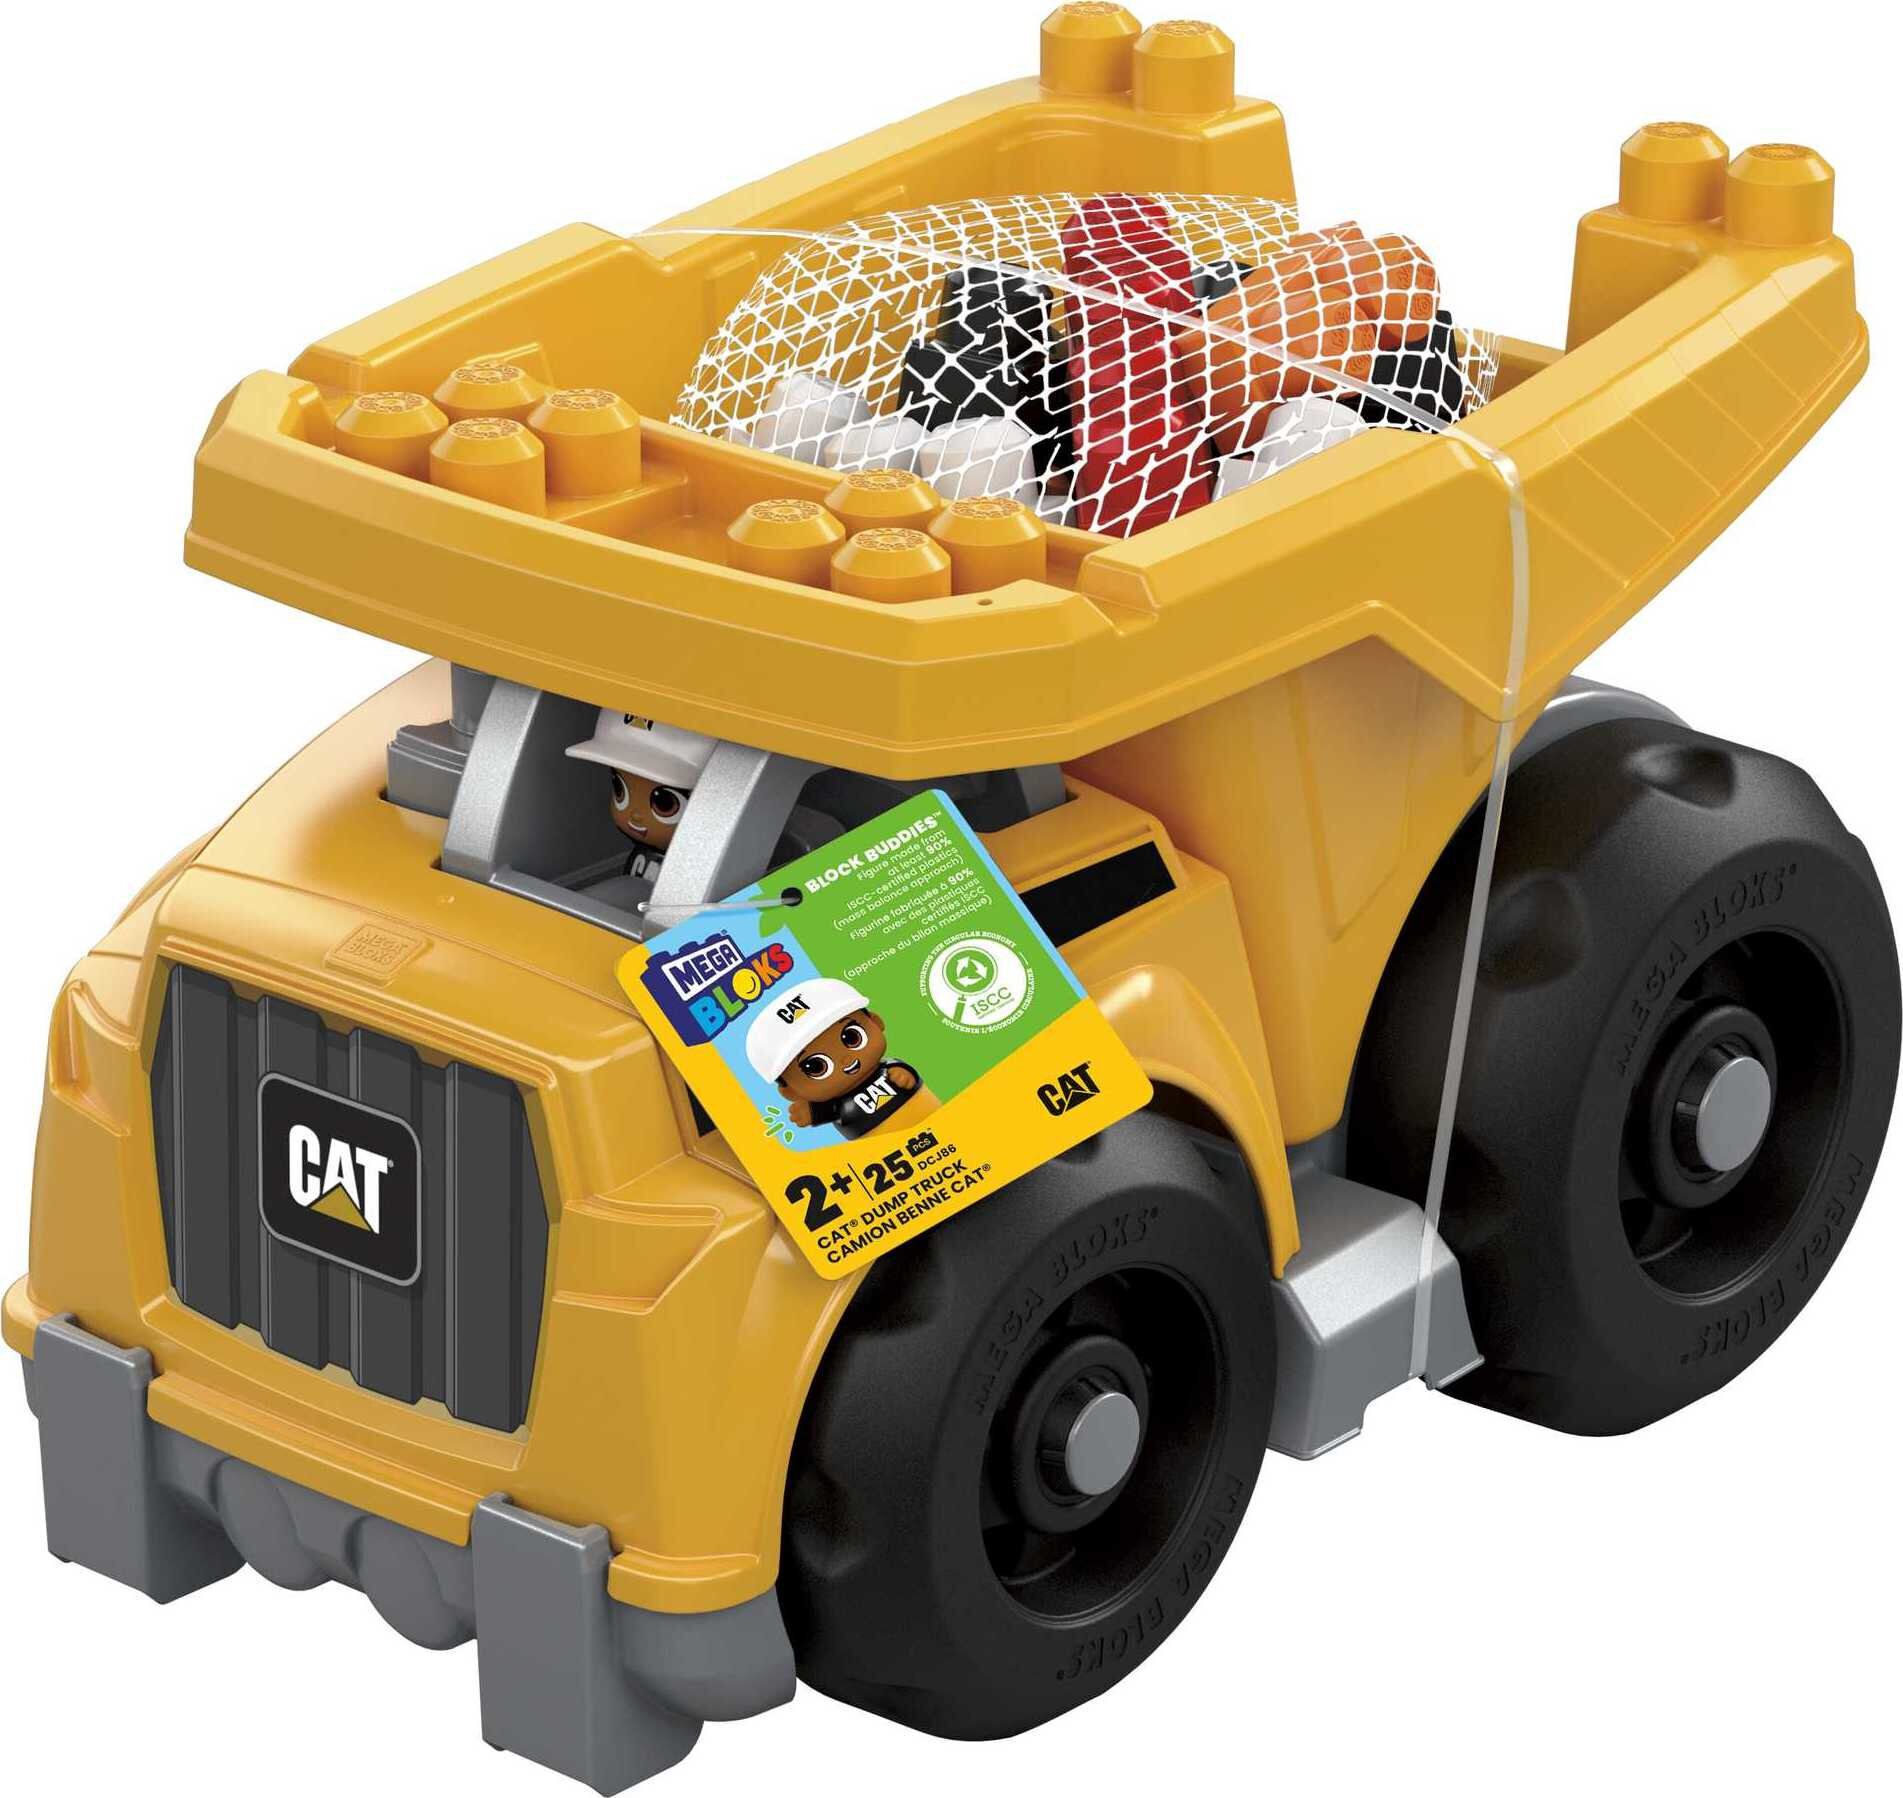 MEGA BLOKS Fisher-Price Building Toy Blocks Cat Large Dump Truck (25 Pieces) For Toddler - image 1 of 7